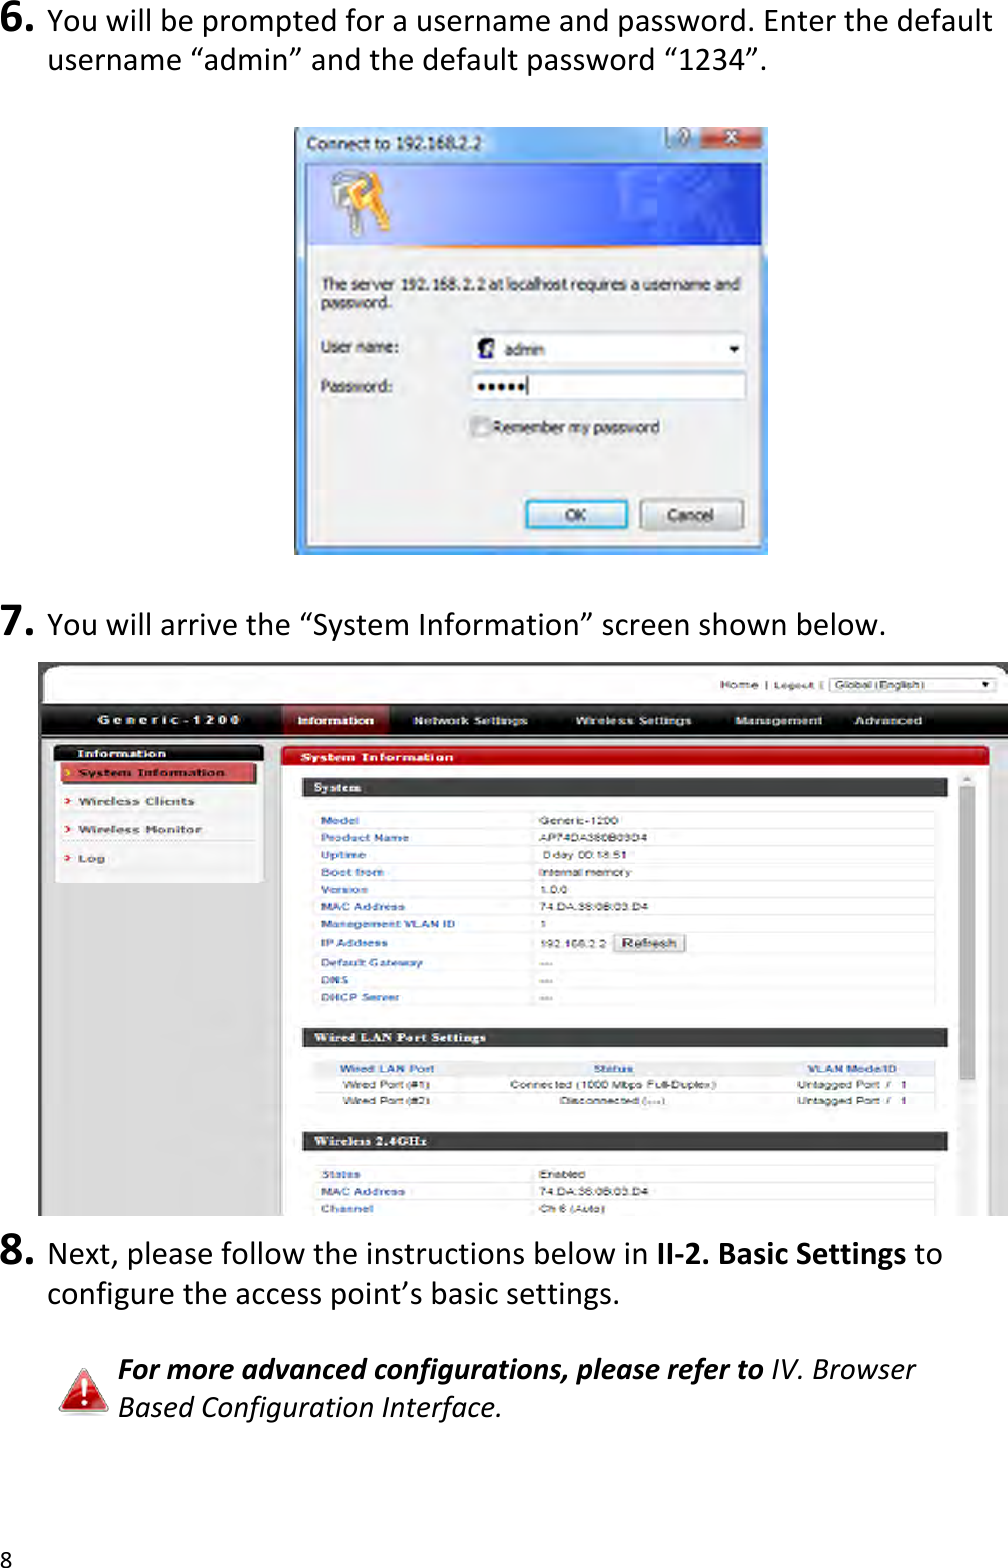 8  6. You will be prompted for a username and password. Enter the default username “admin” and the default password “1234”.    7. You will arrive the “System Information” screen shown below.   8. Next, please follow the instructions below in II-2. Basic Settings to configure the access point’s basic settings.  For more advanced configurations, please refer to IV. Browser Based Configuration Interface.  